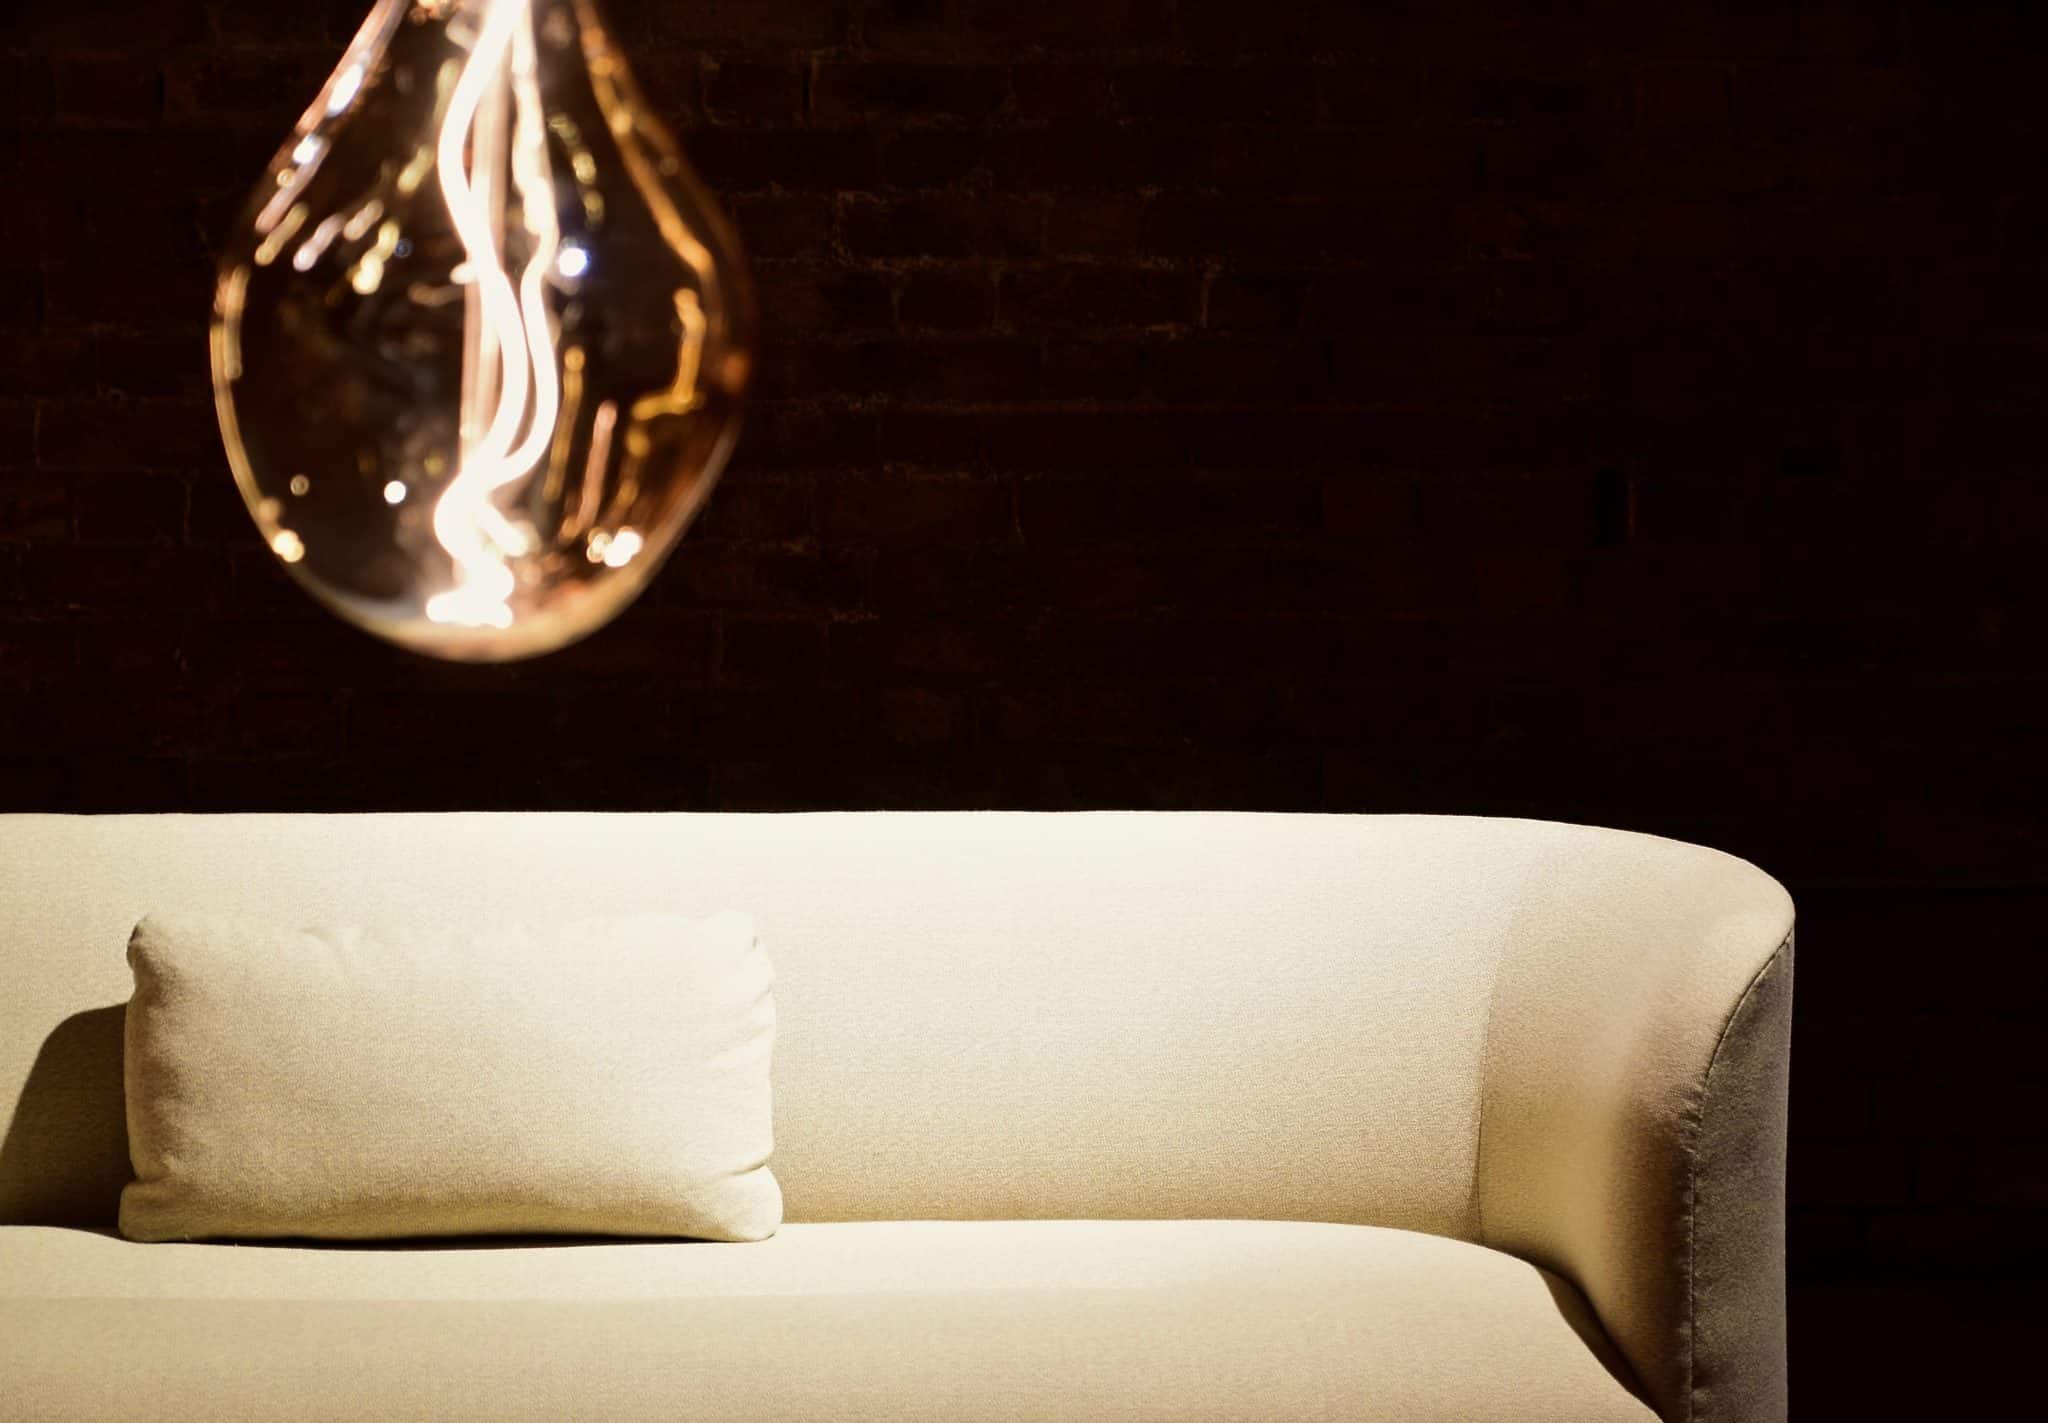 4 Ways to Improve Lighting and Promote Eye Health At Home